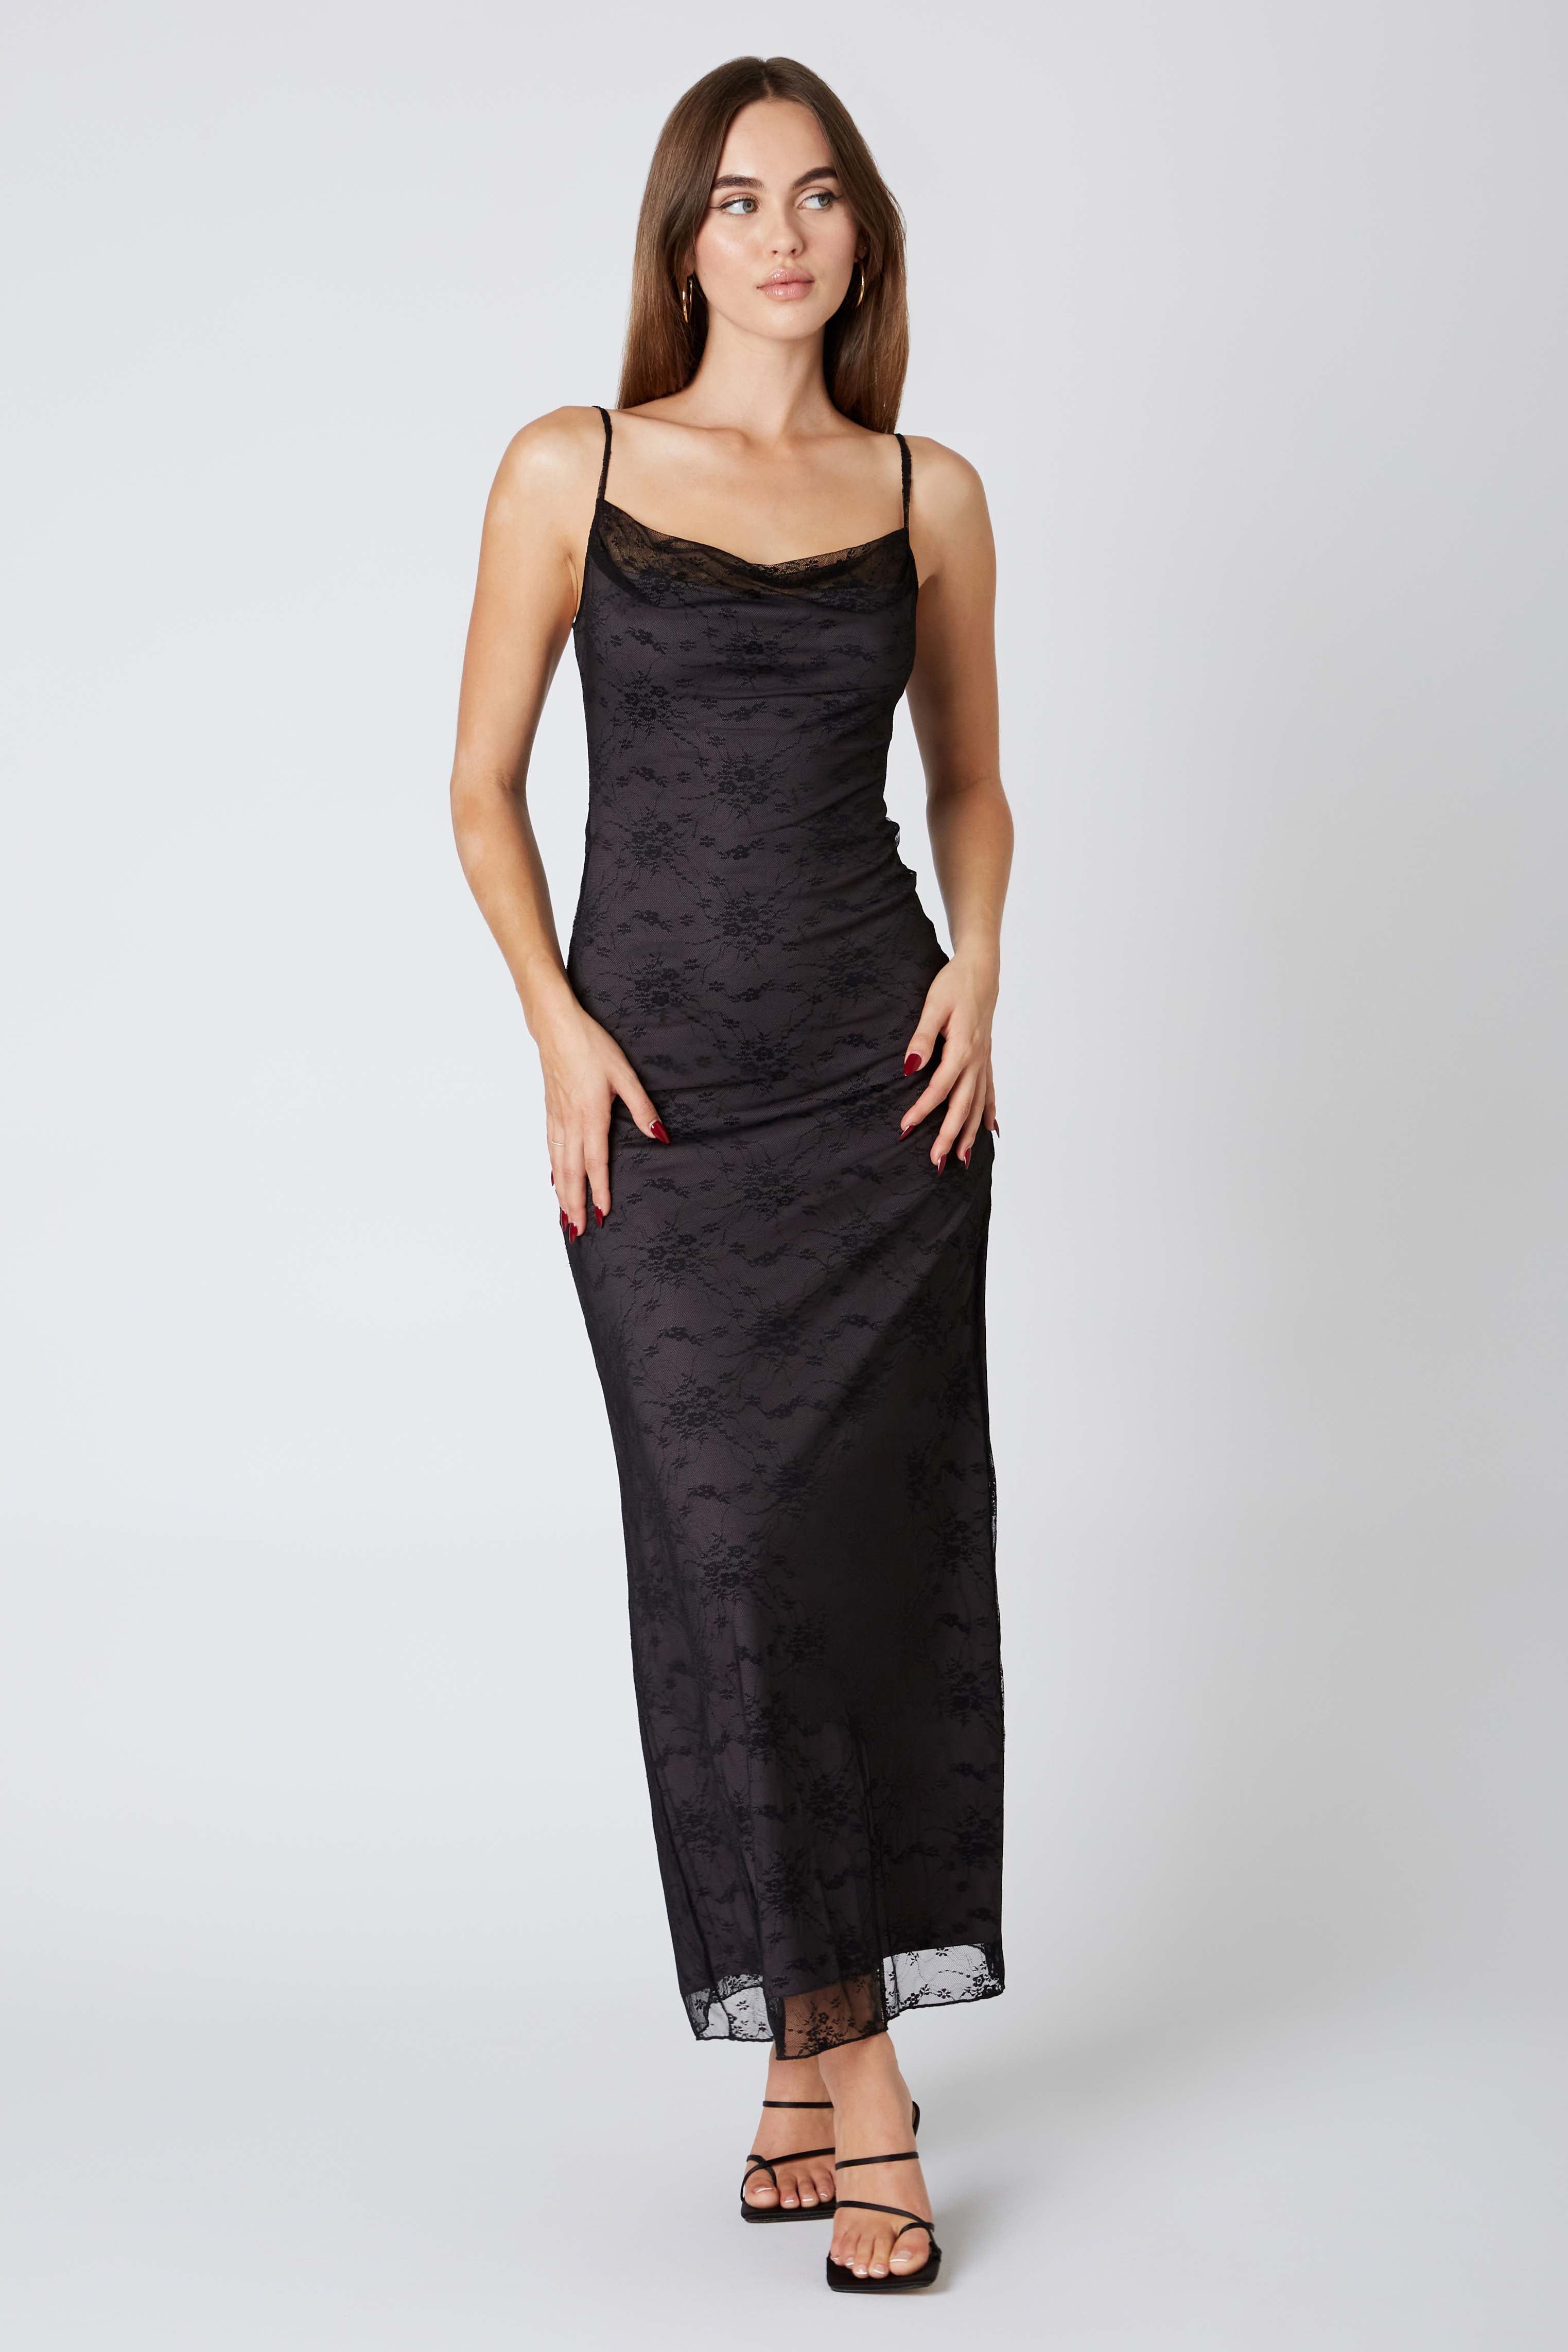 Lace Maxi Dress in Black Front View